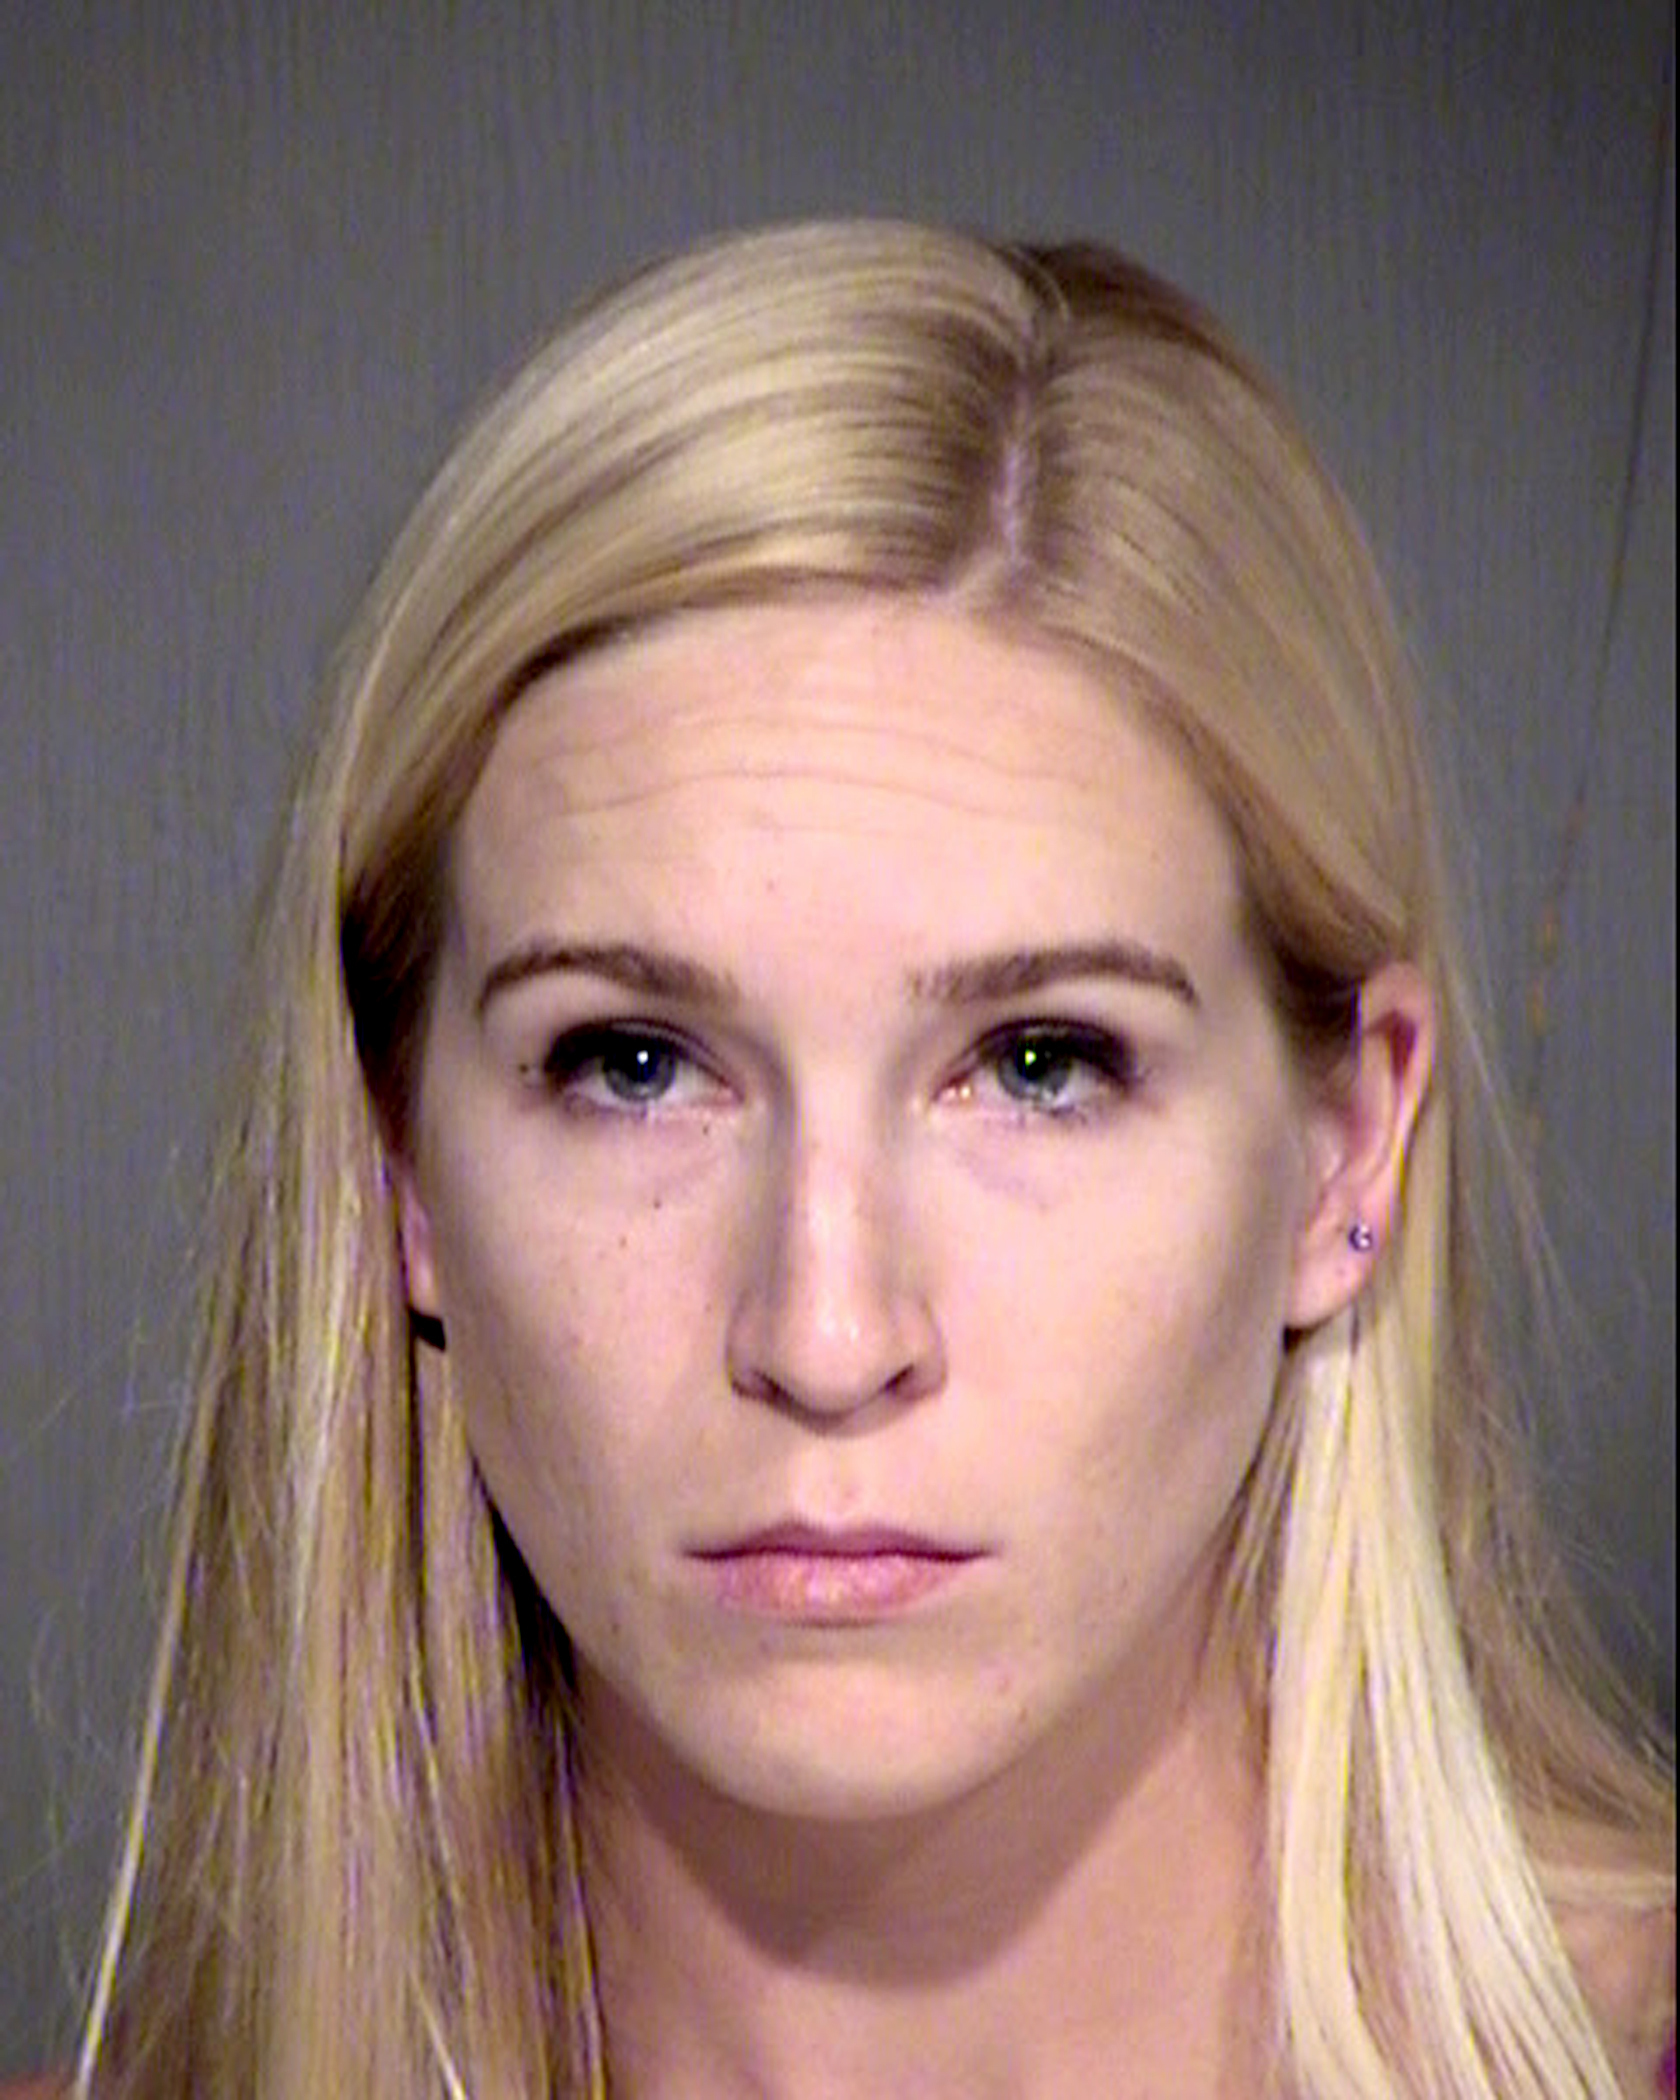 Keri Harwood, who was arrested on Aug. 13, 2017, on suspicion of five counts each of child molestation and sexual exploitation of a minor. The 28-year-old Arizona woman is accused of molesting two young children and selling videos of the acts on the internet. (Maricopa County Sheriff's Office/AP)